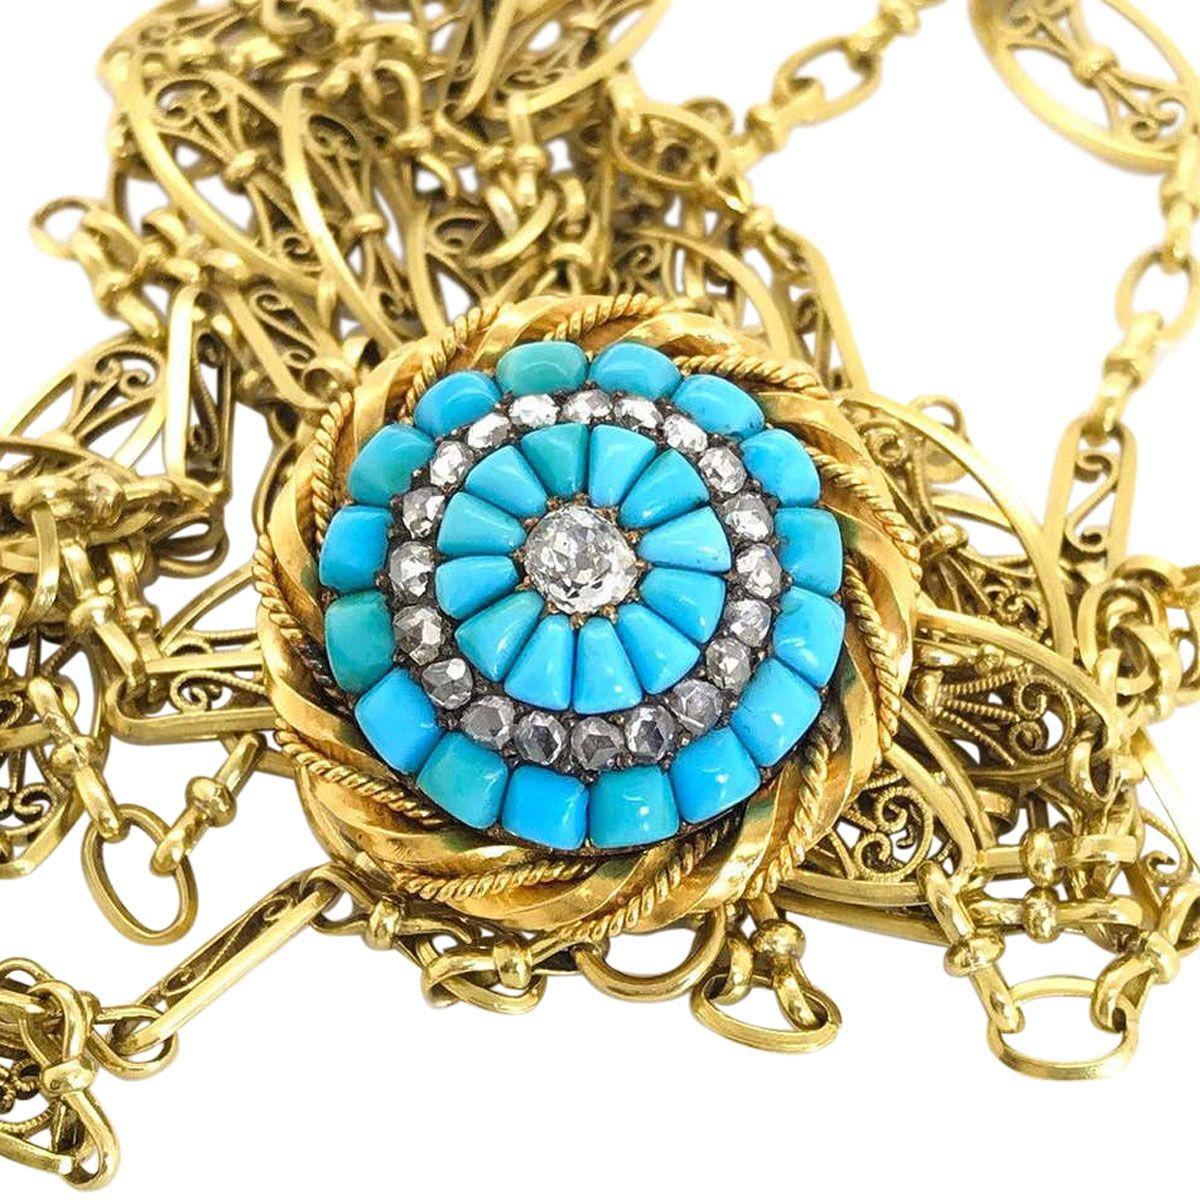 A magnificent piece with stunning bright blue matching turquoise and old cut diamonds, a gorgeous and eye-catching combination. 
This brooch is from an era when craftsmanship was done by hand, each small gem hand cut to fit into this pretty brooch.